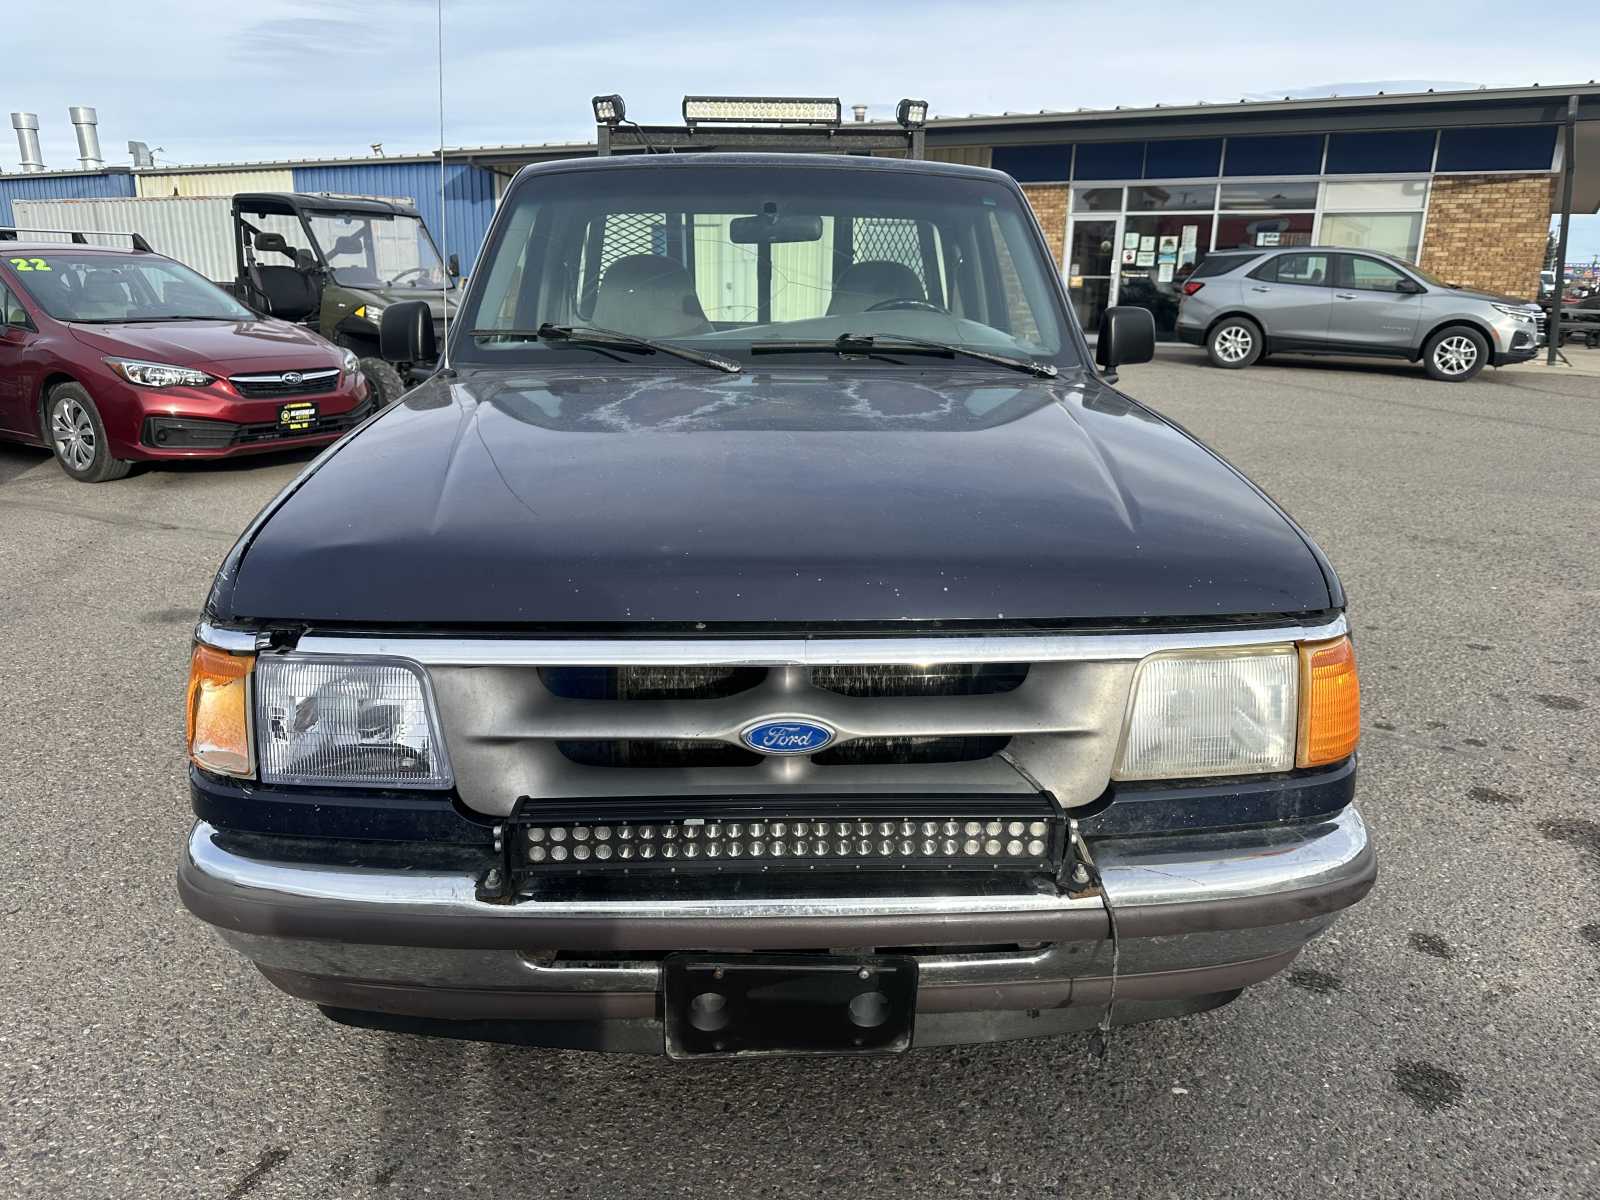 Used 1997 Ford Ranger XLT with VIN 1FTCR10U6VPB22128 for sale in Dillon, MT